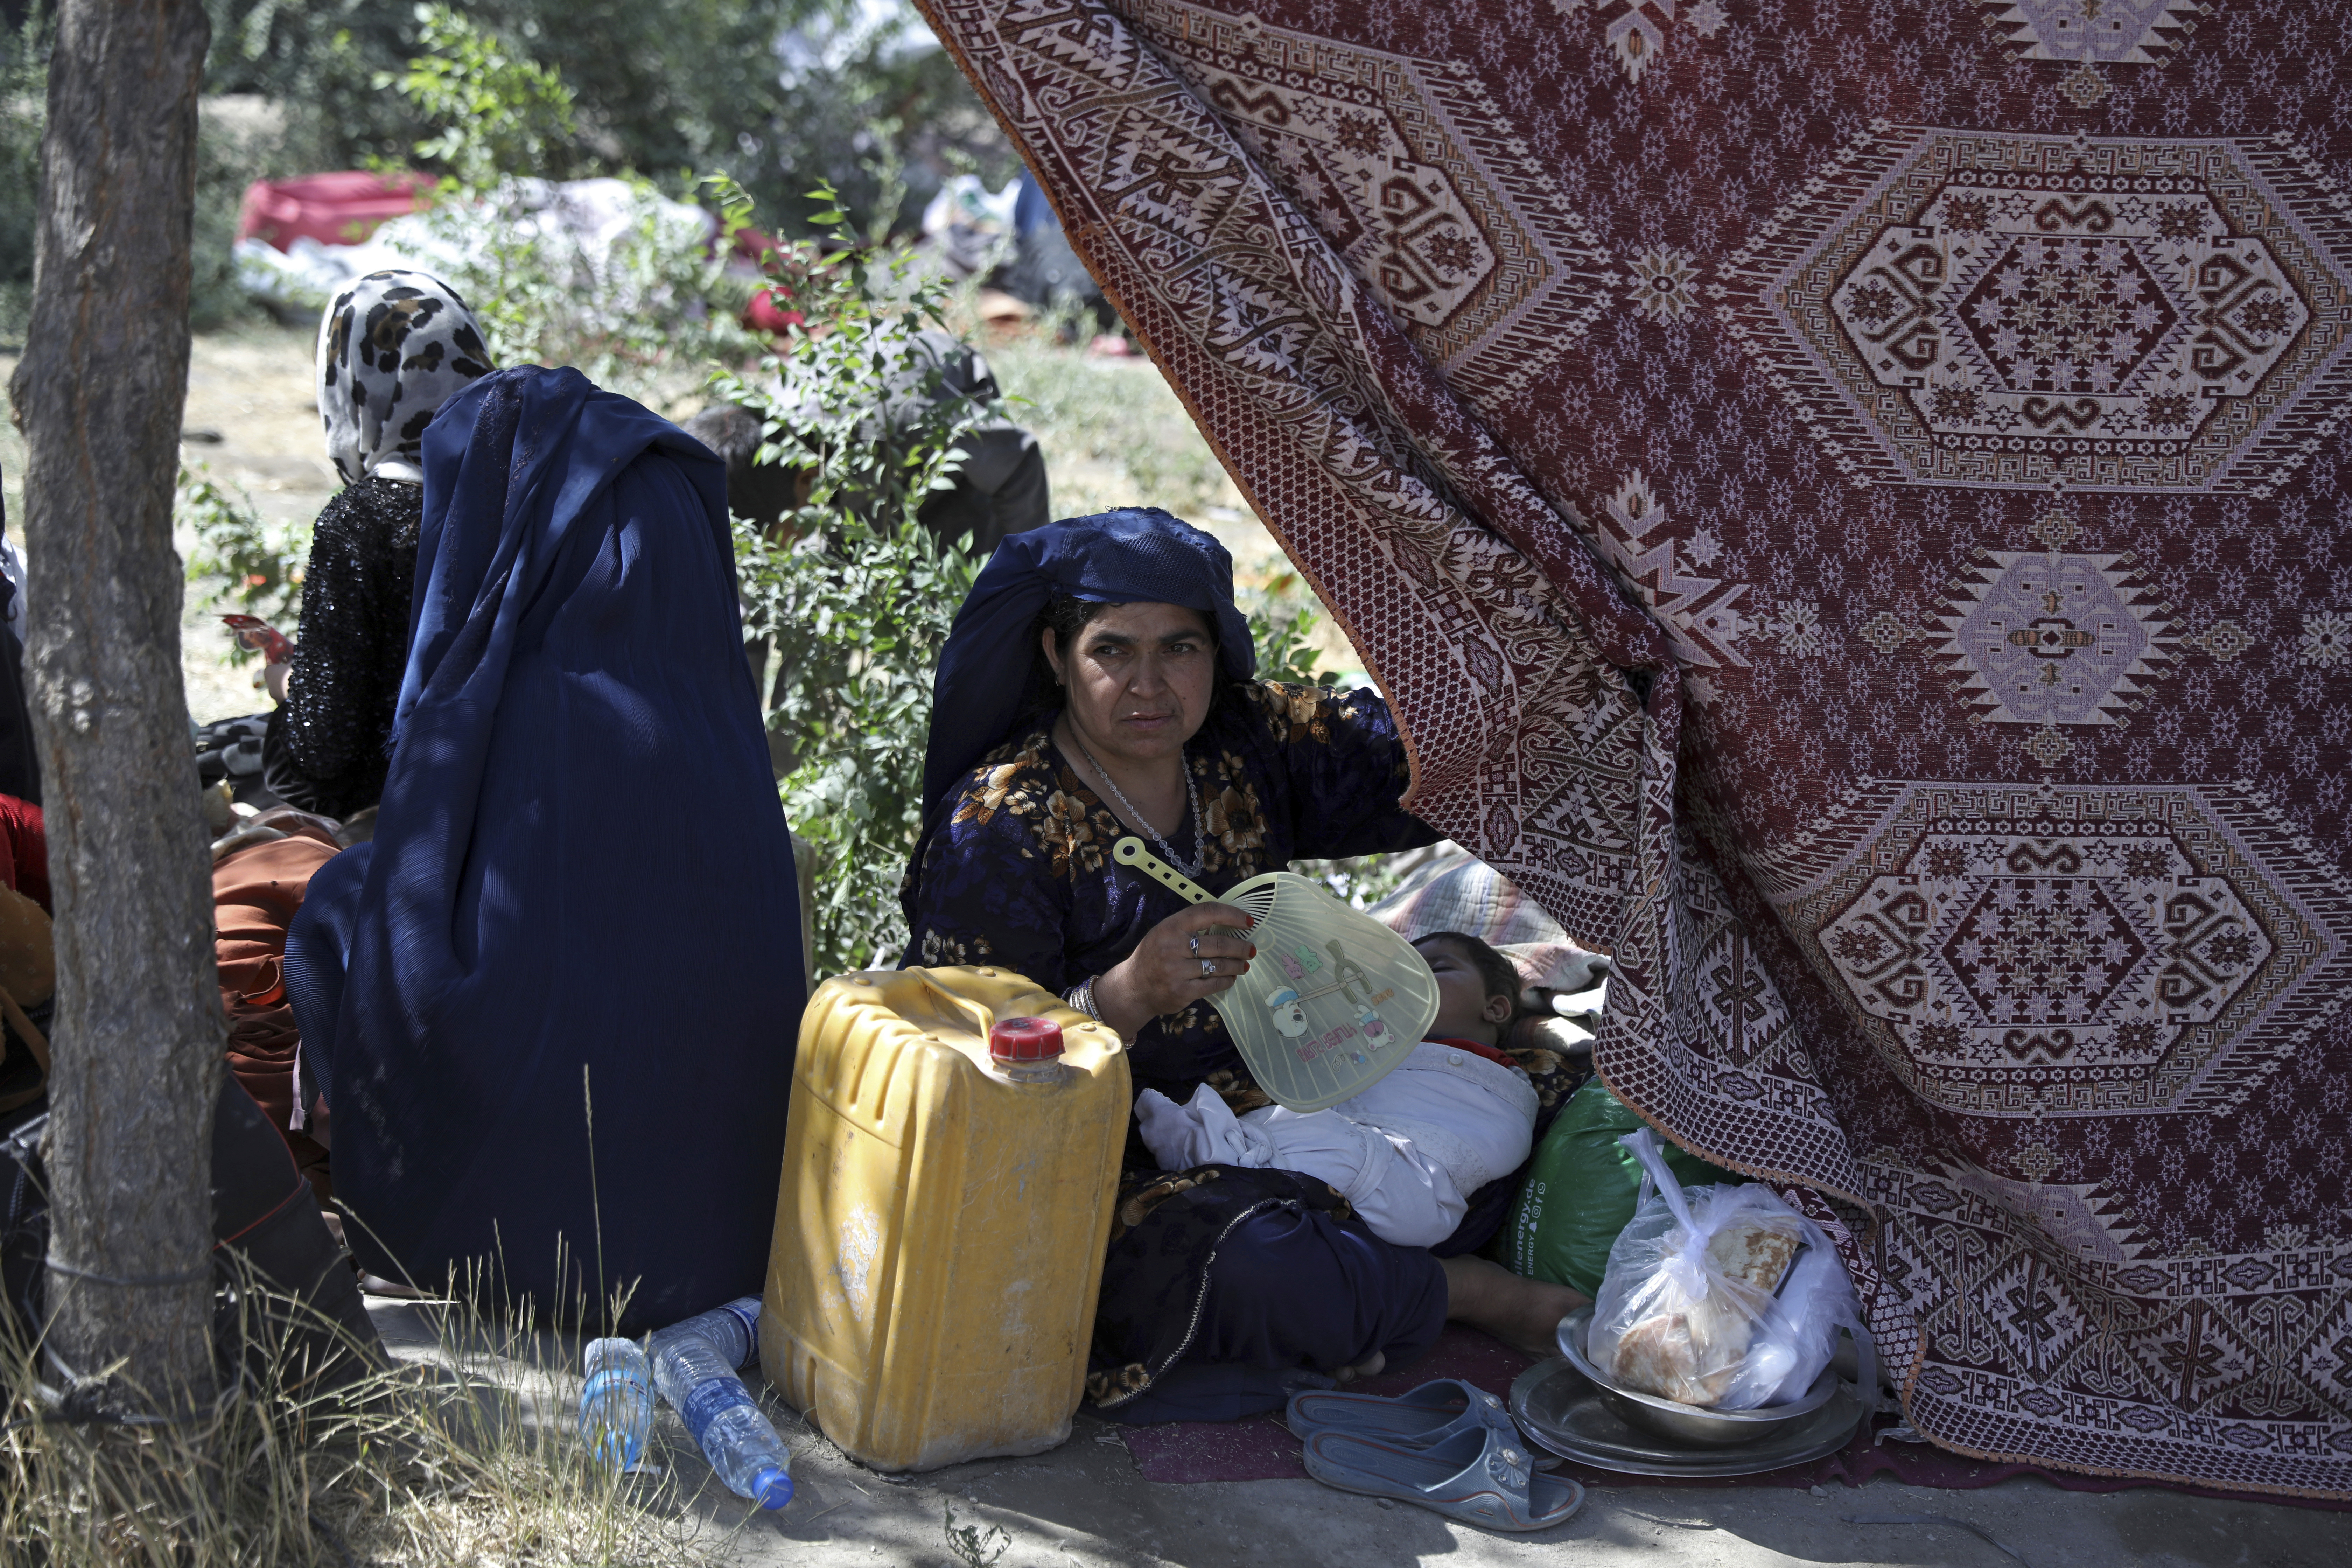 Uncertainty looms for Afghan women despite Taliban outreach